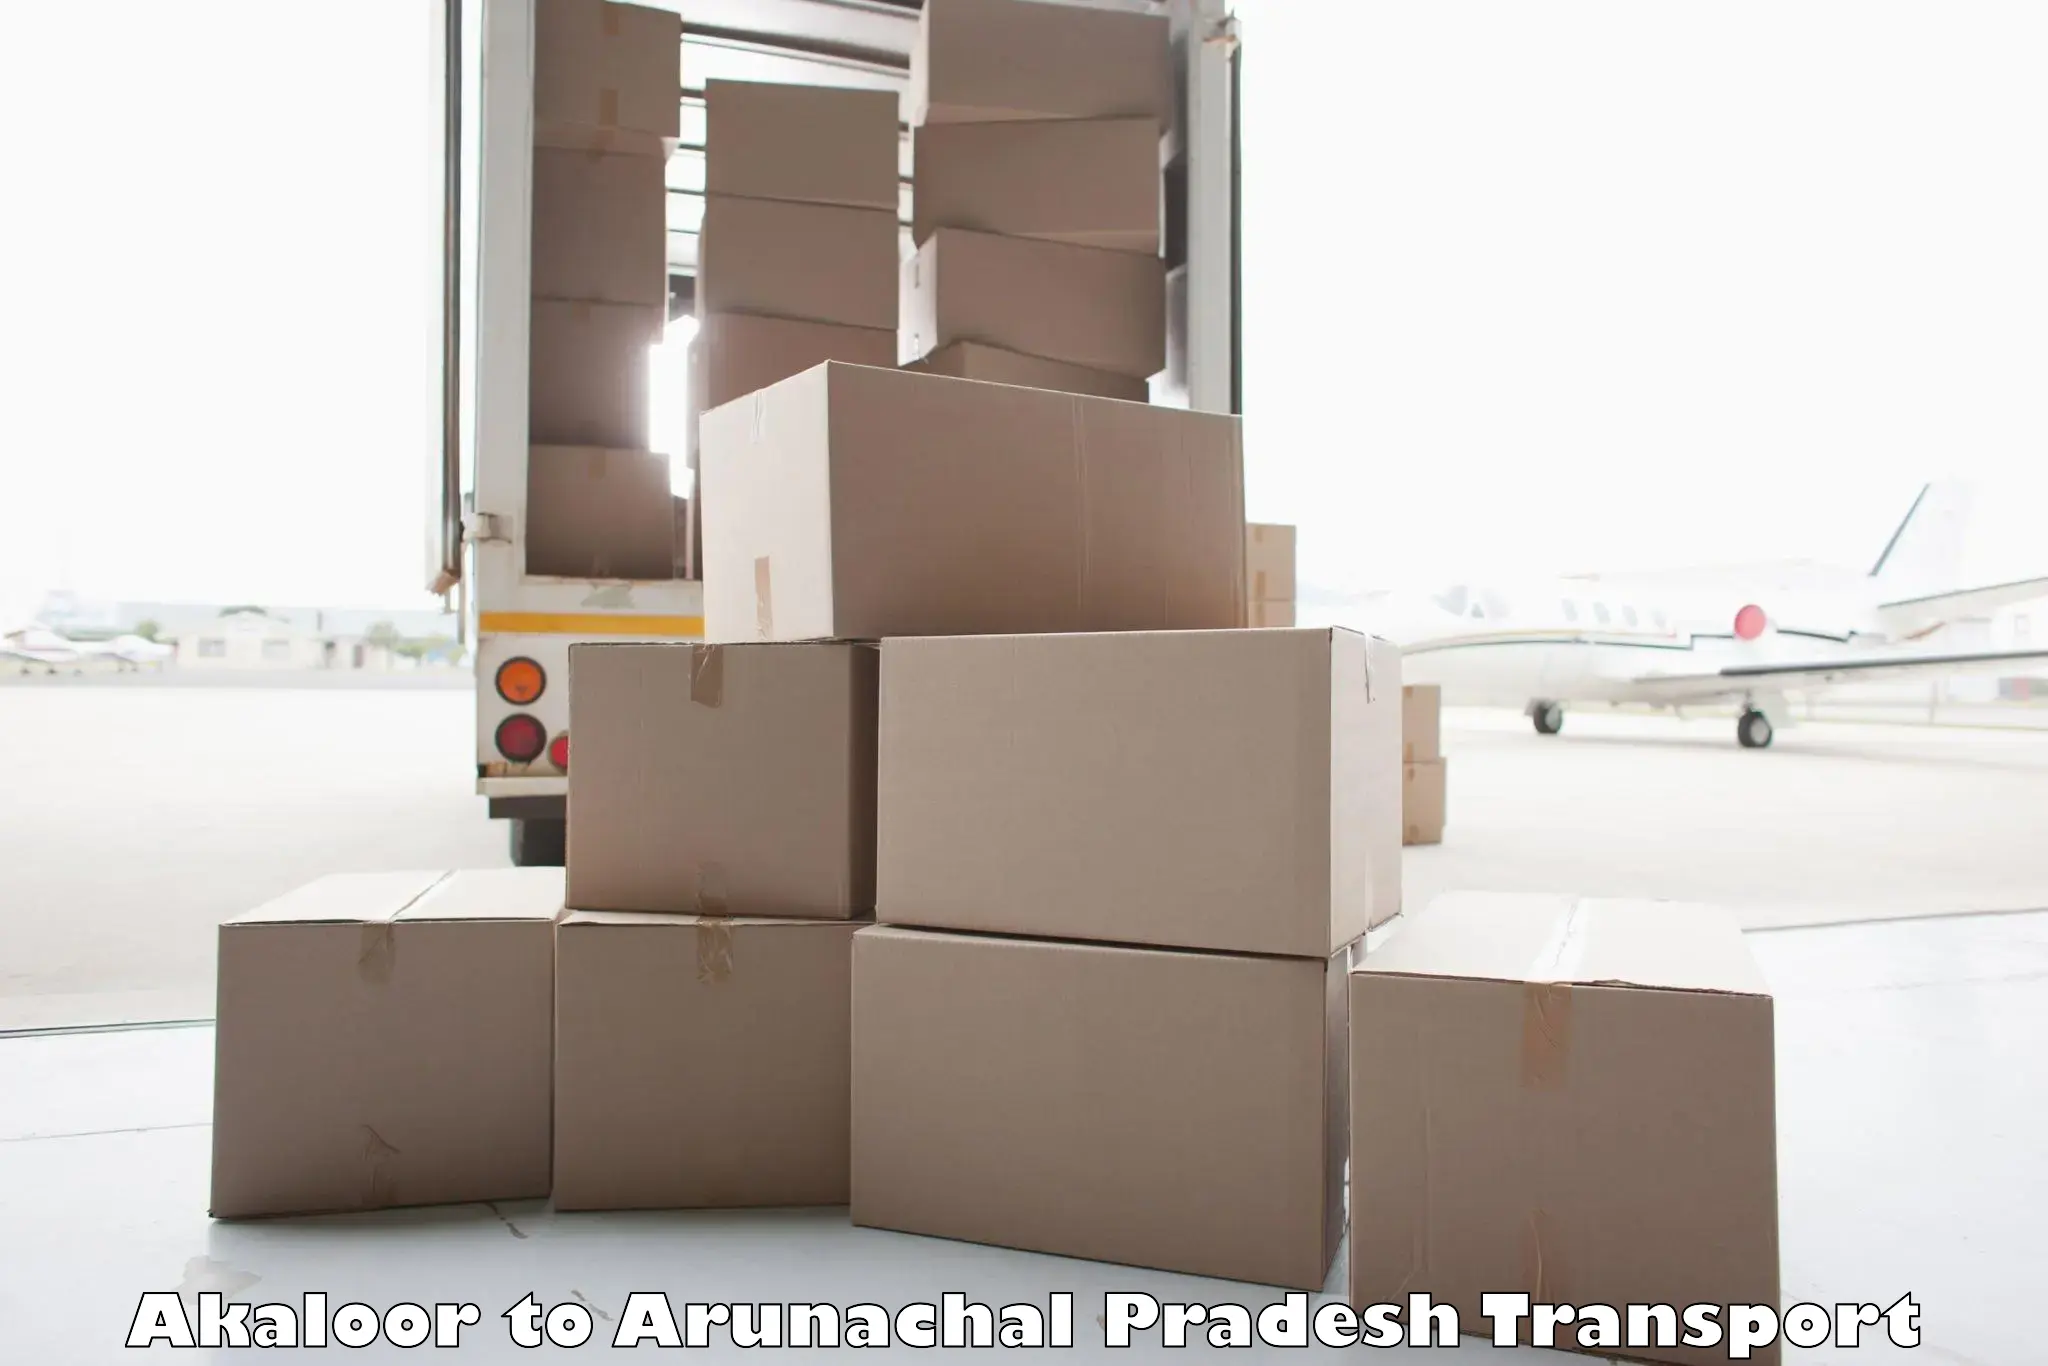 Parcel transport services in Akaloor to Chowkham